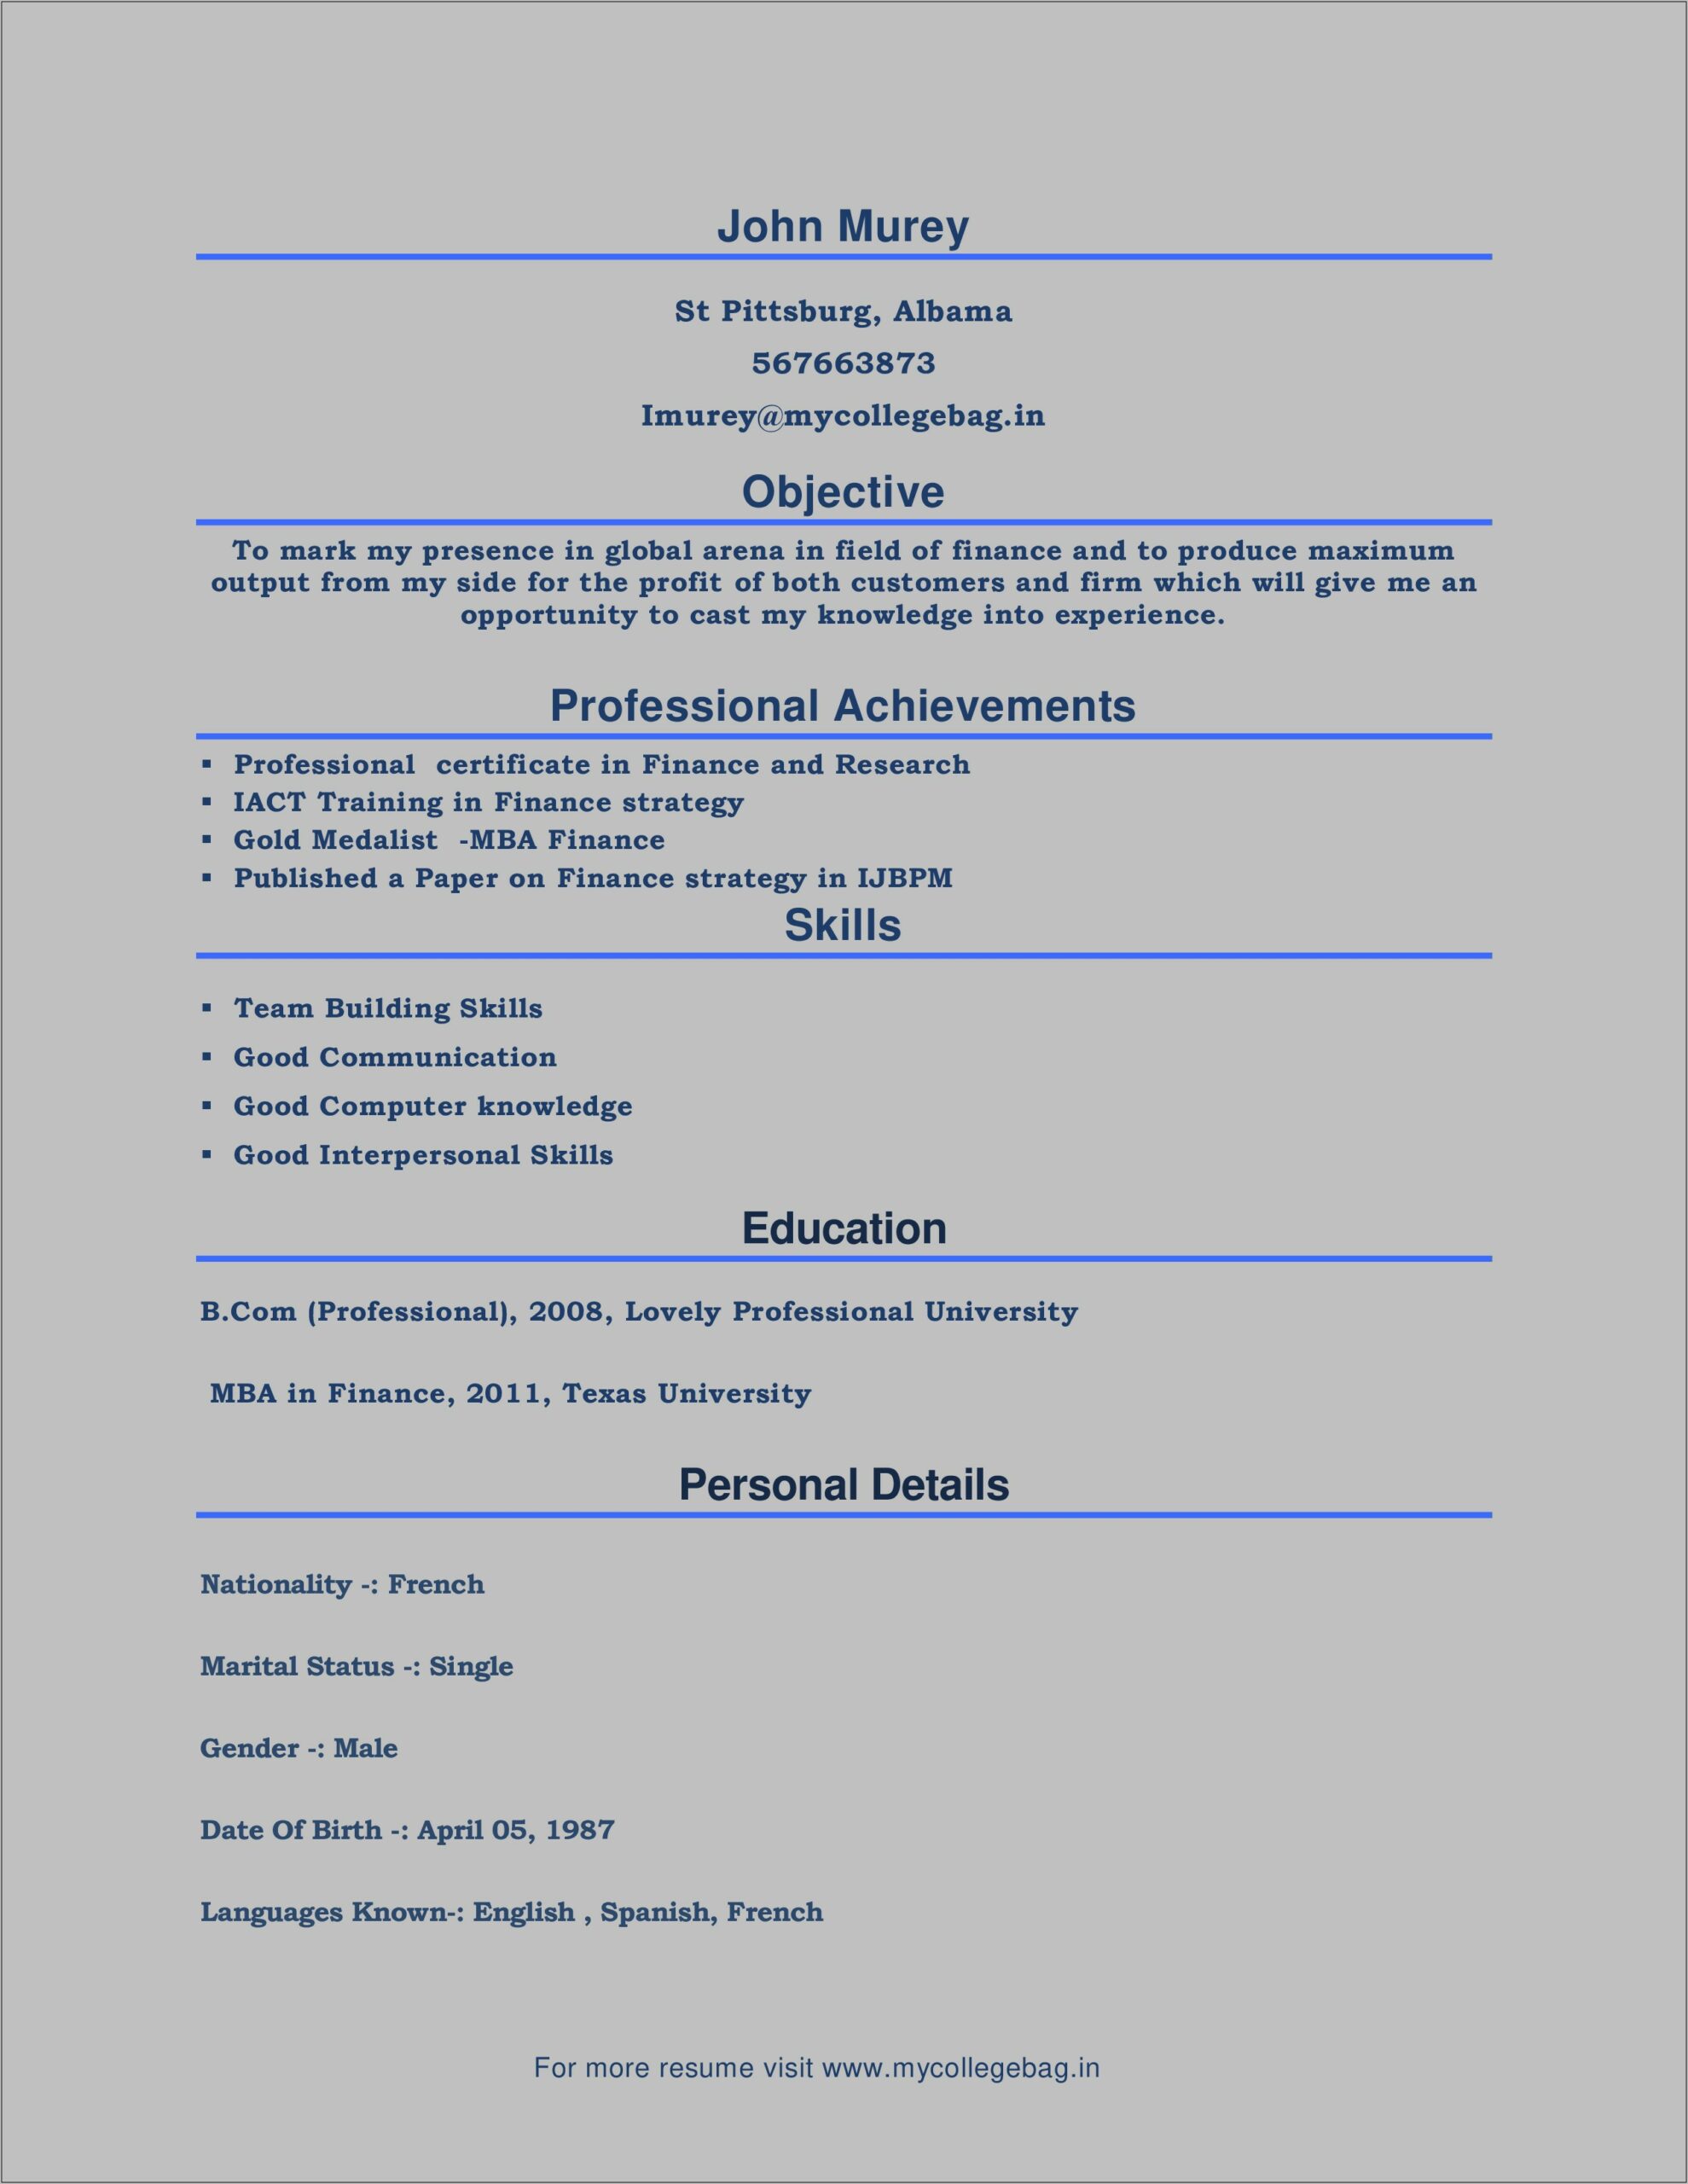 Free Resume Format Download For Mba Freshers